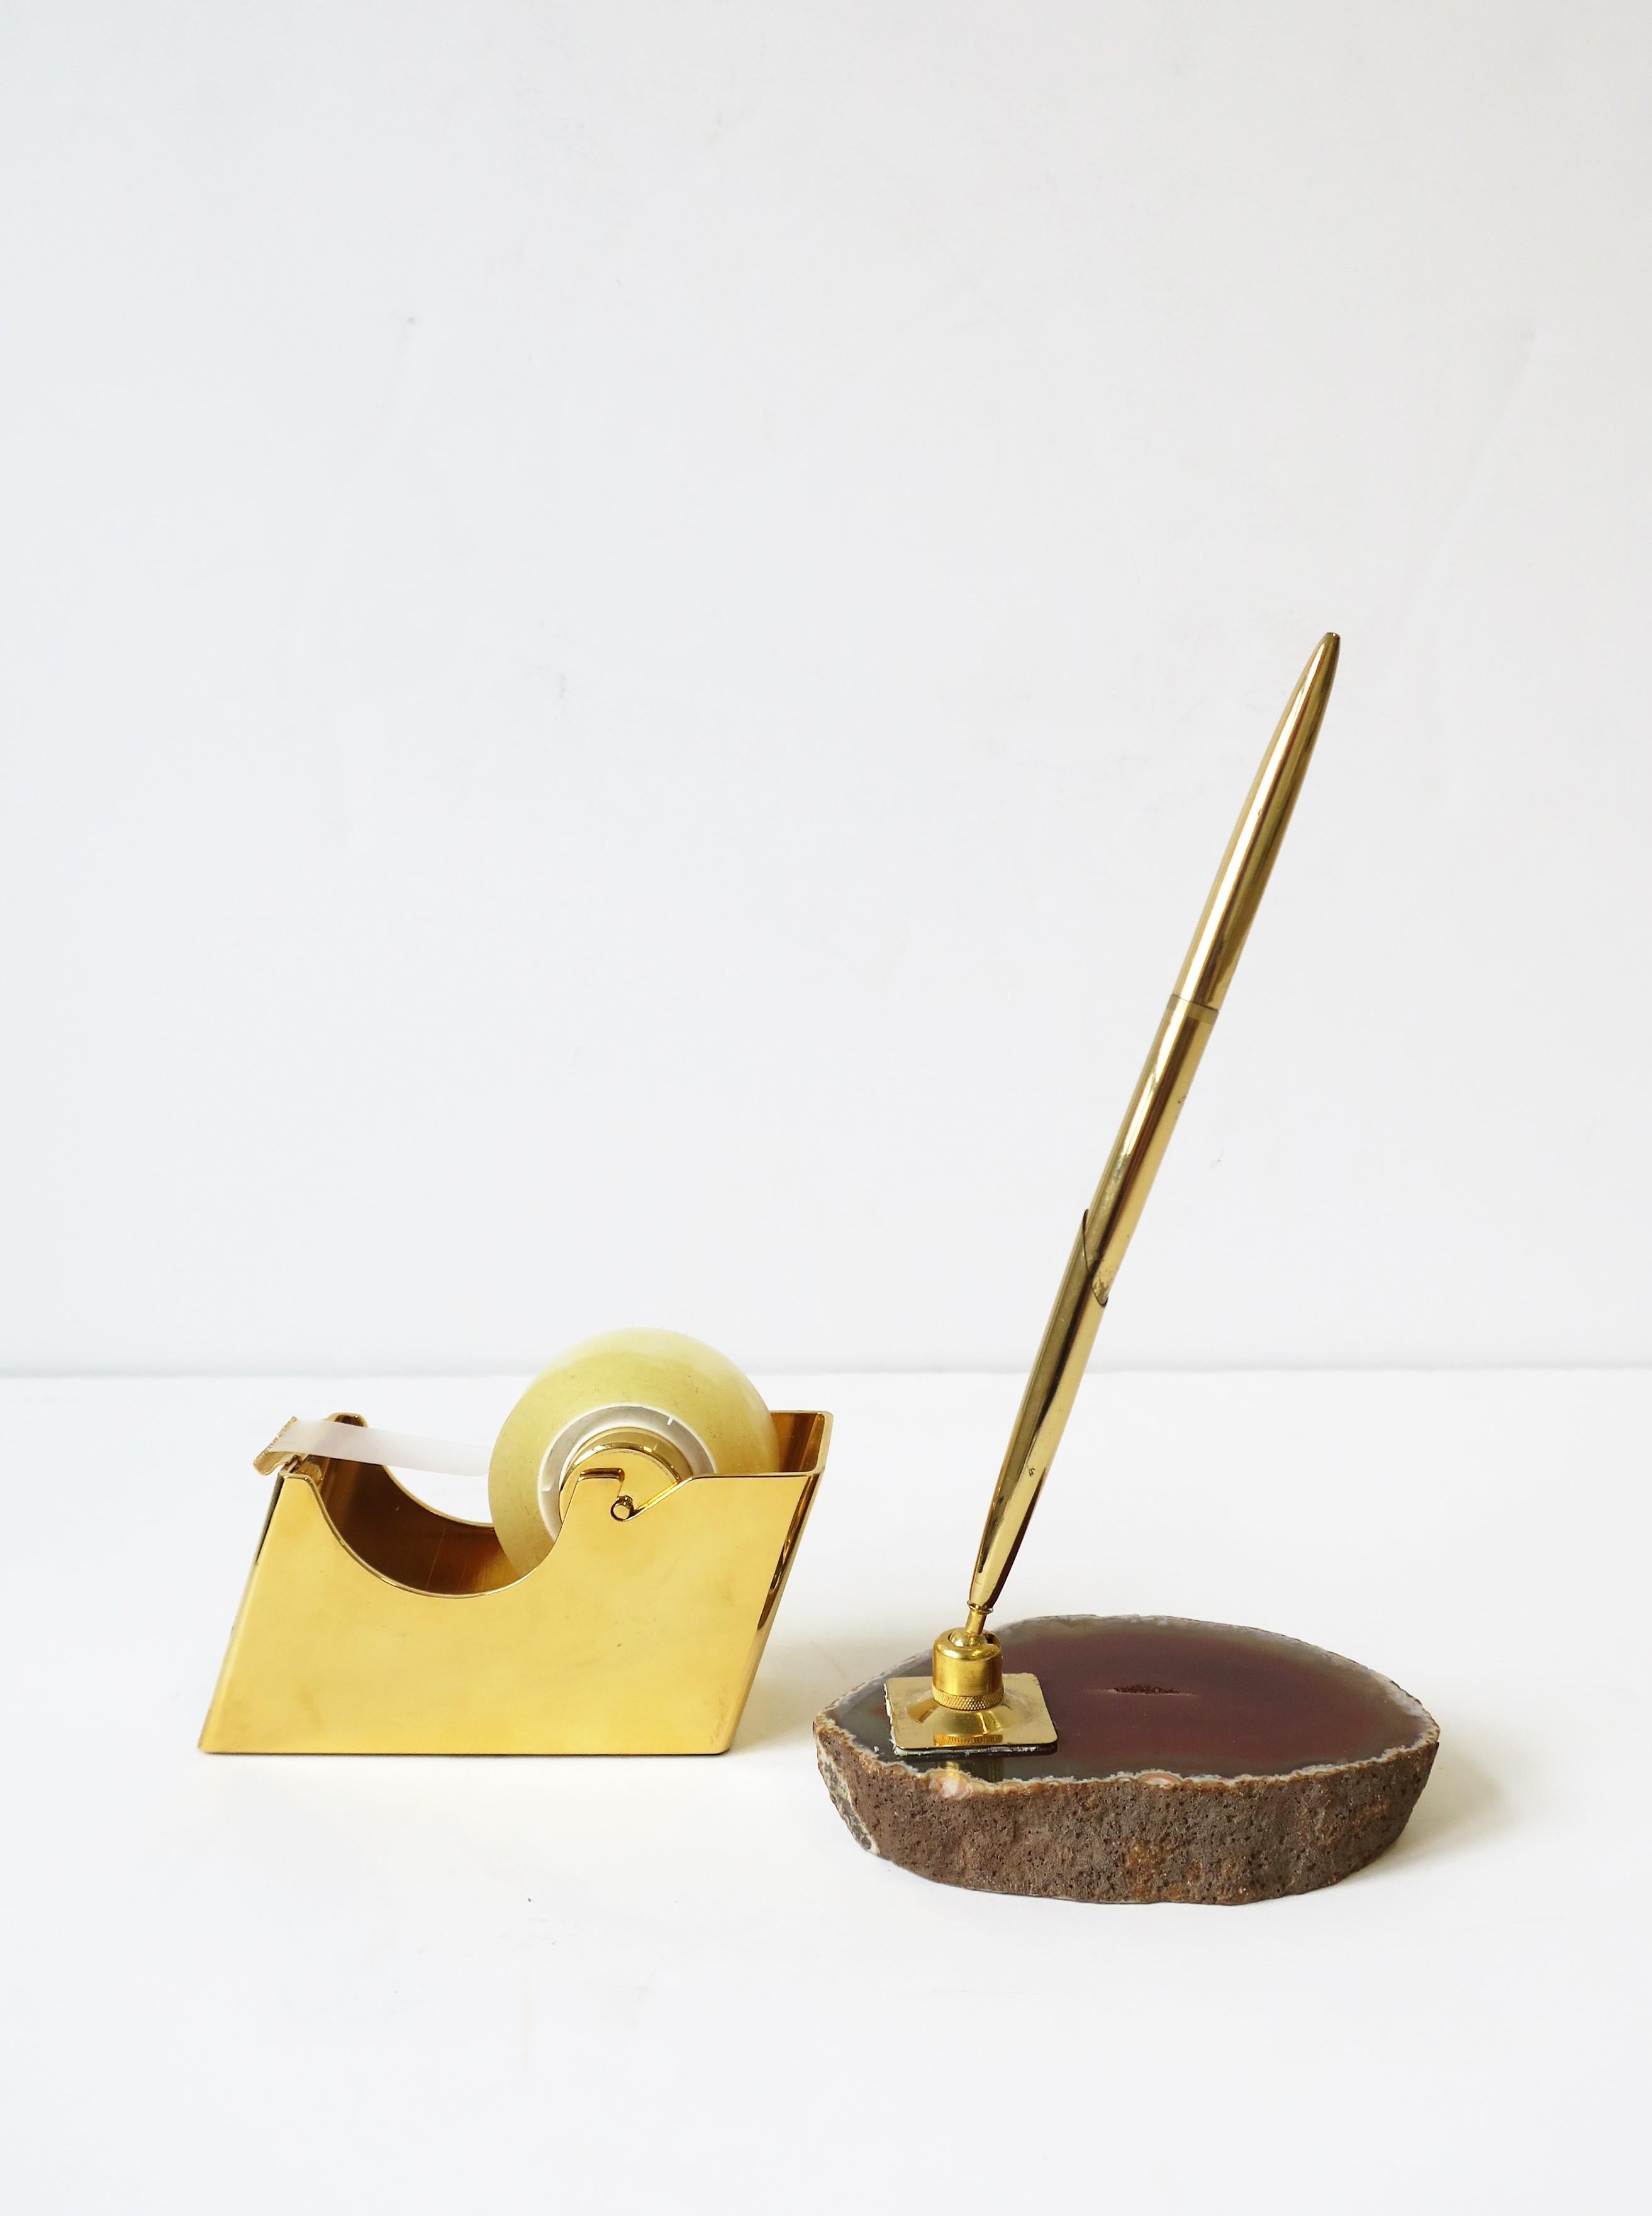 Agate Onyx and Brass Desk Pen Holder, circa 1970s For Sale 2